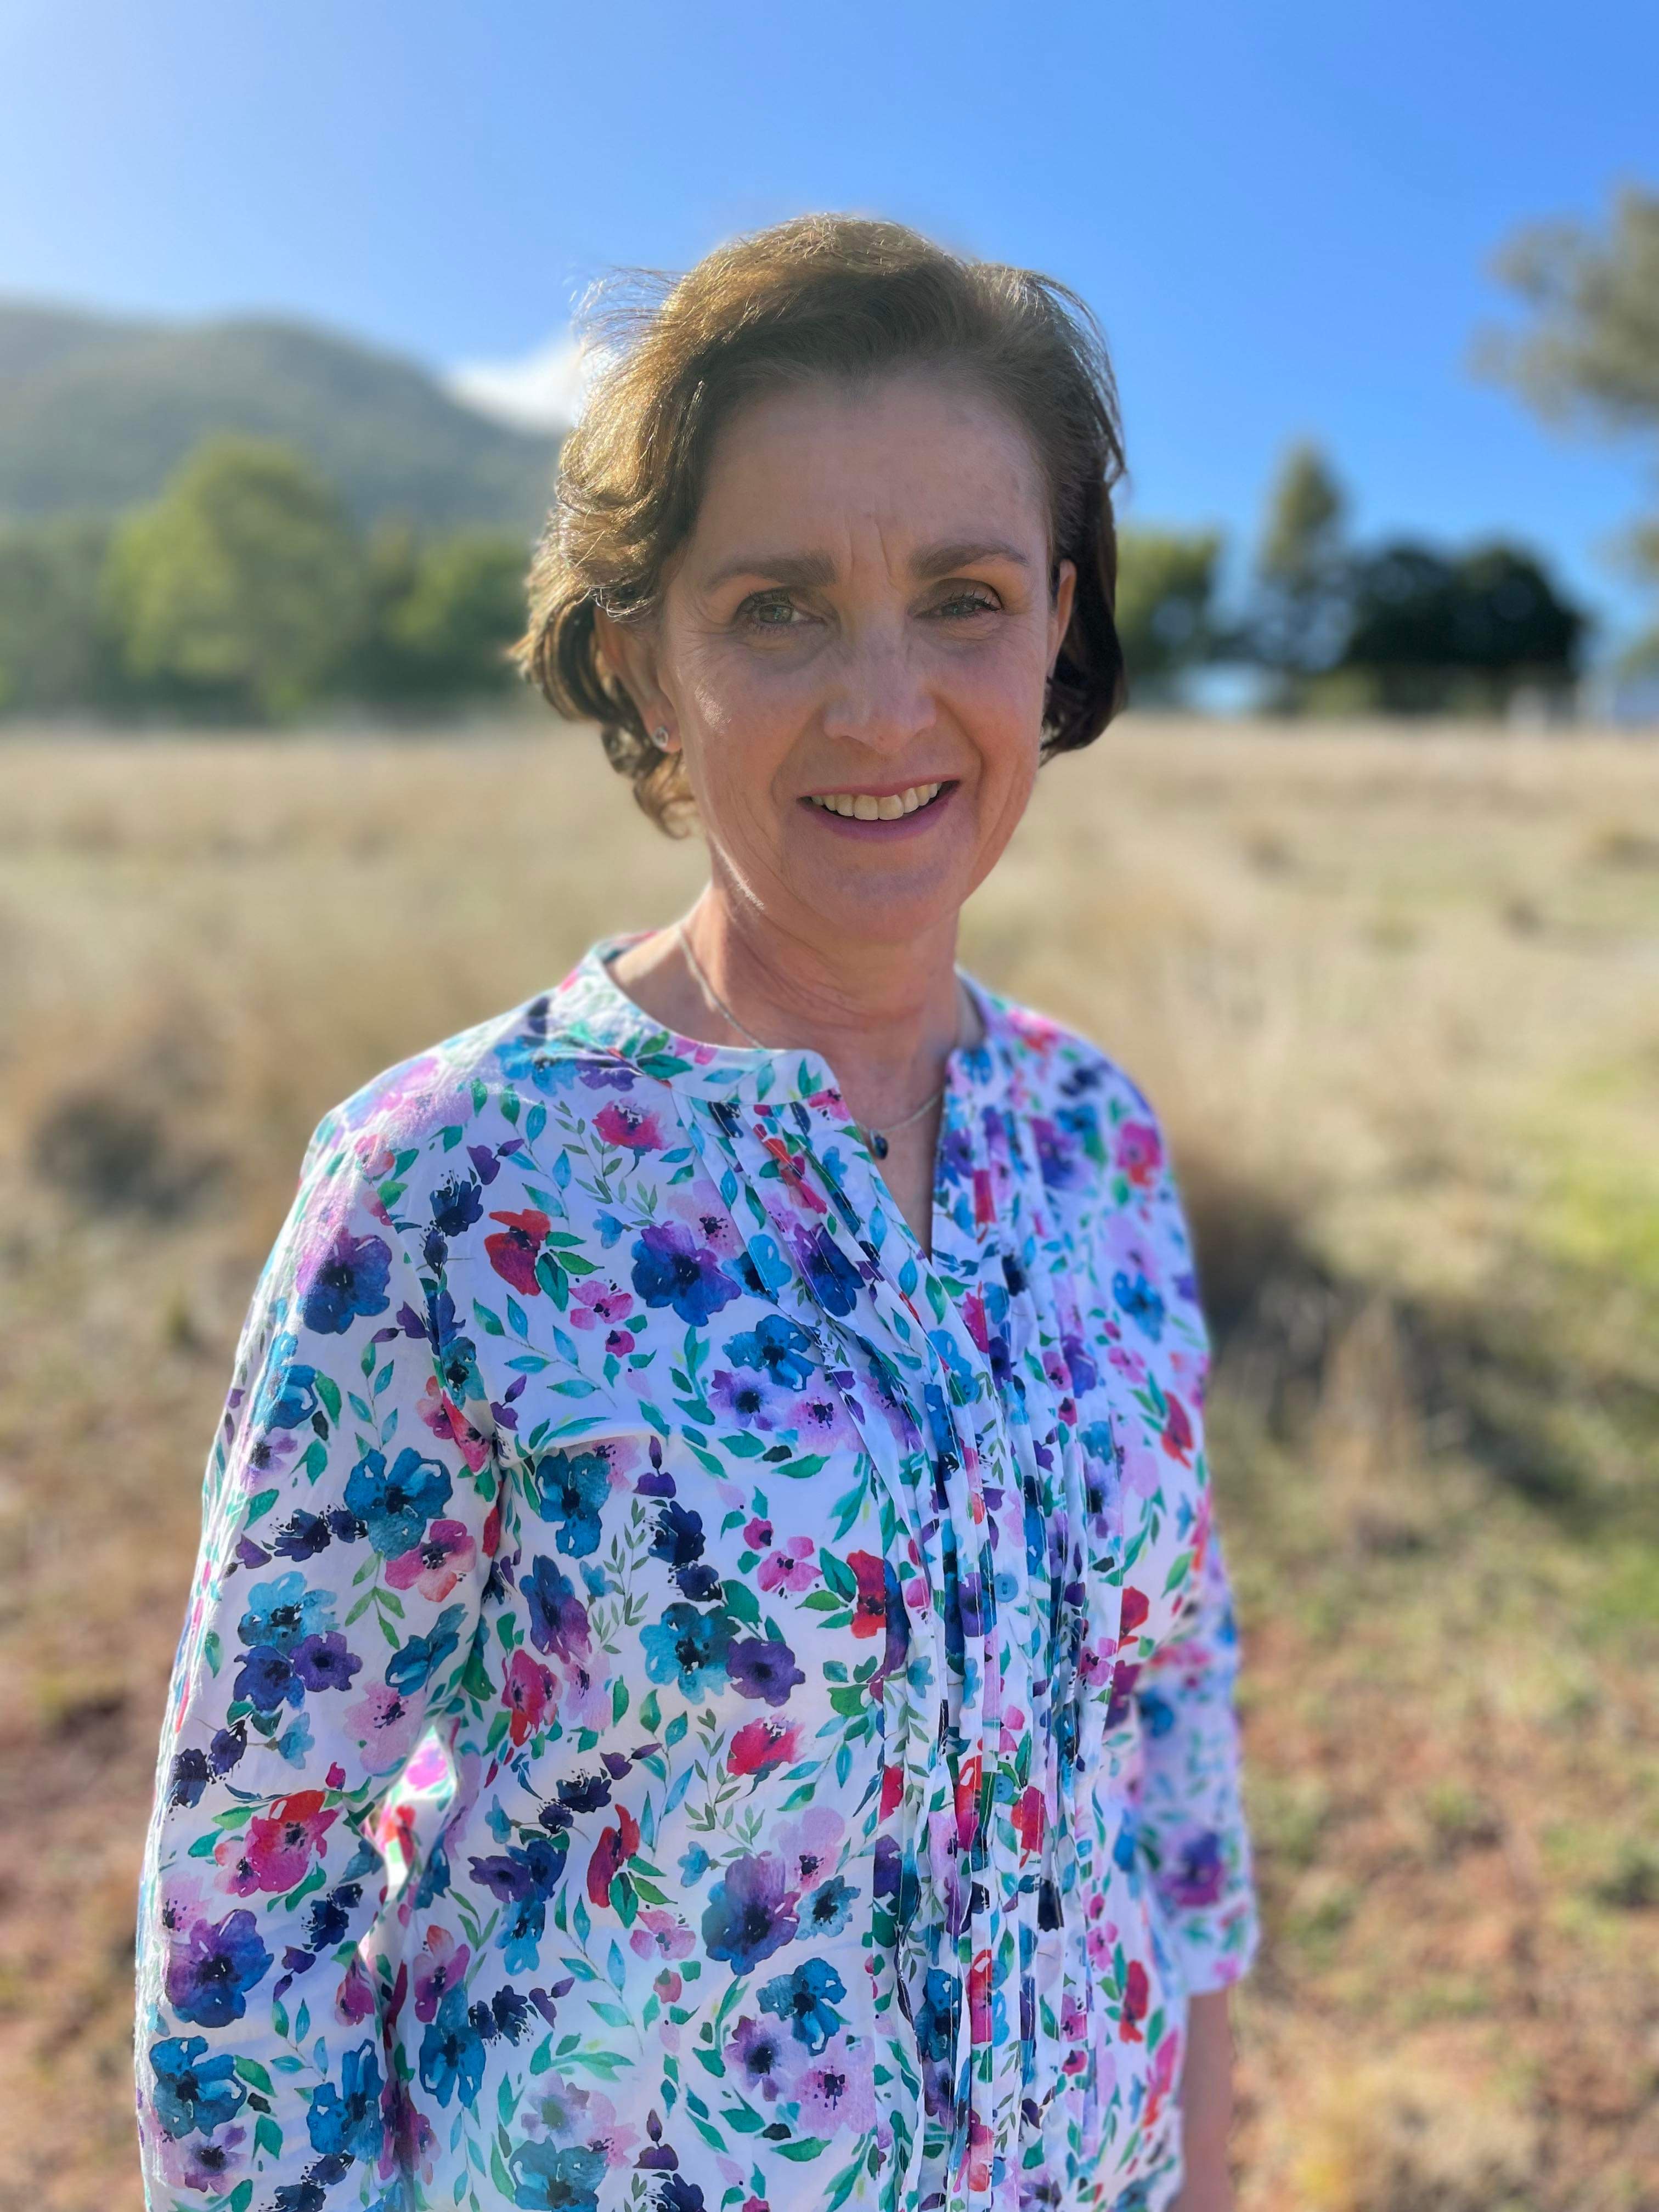 Mature female student standing in a field wearing a white floral shirt.